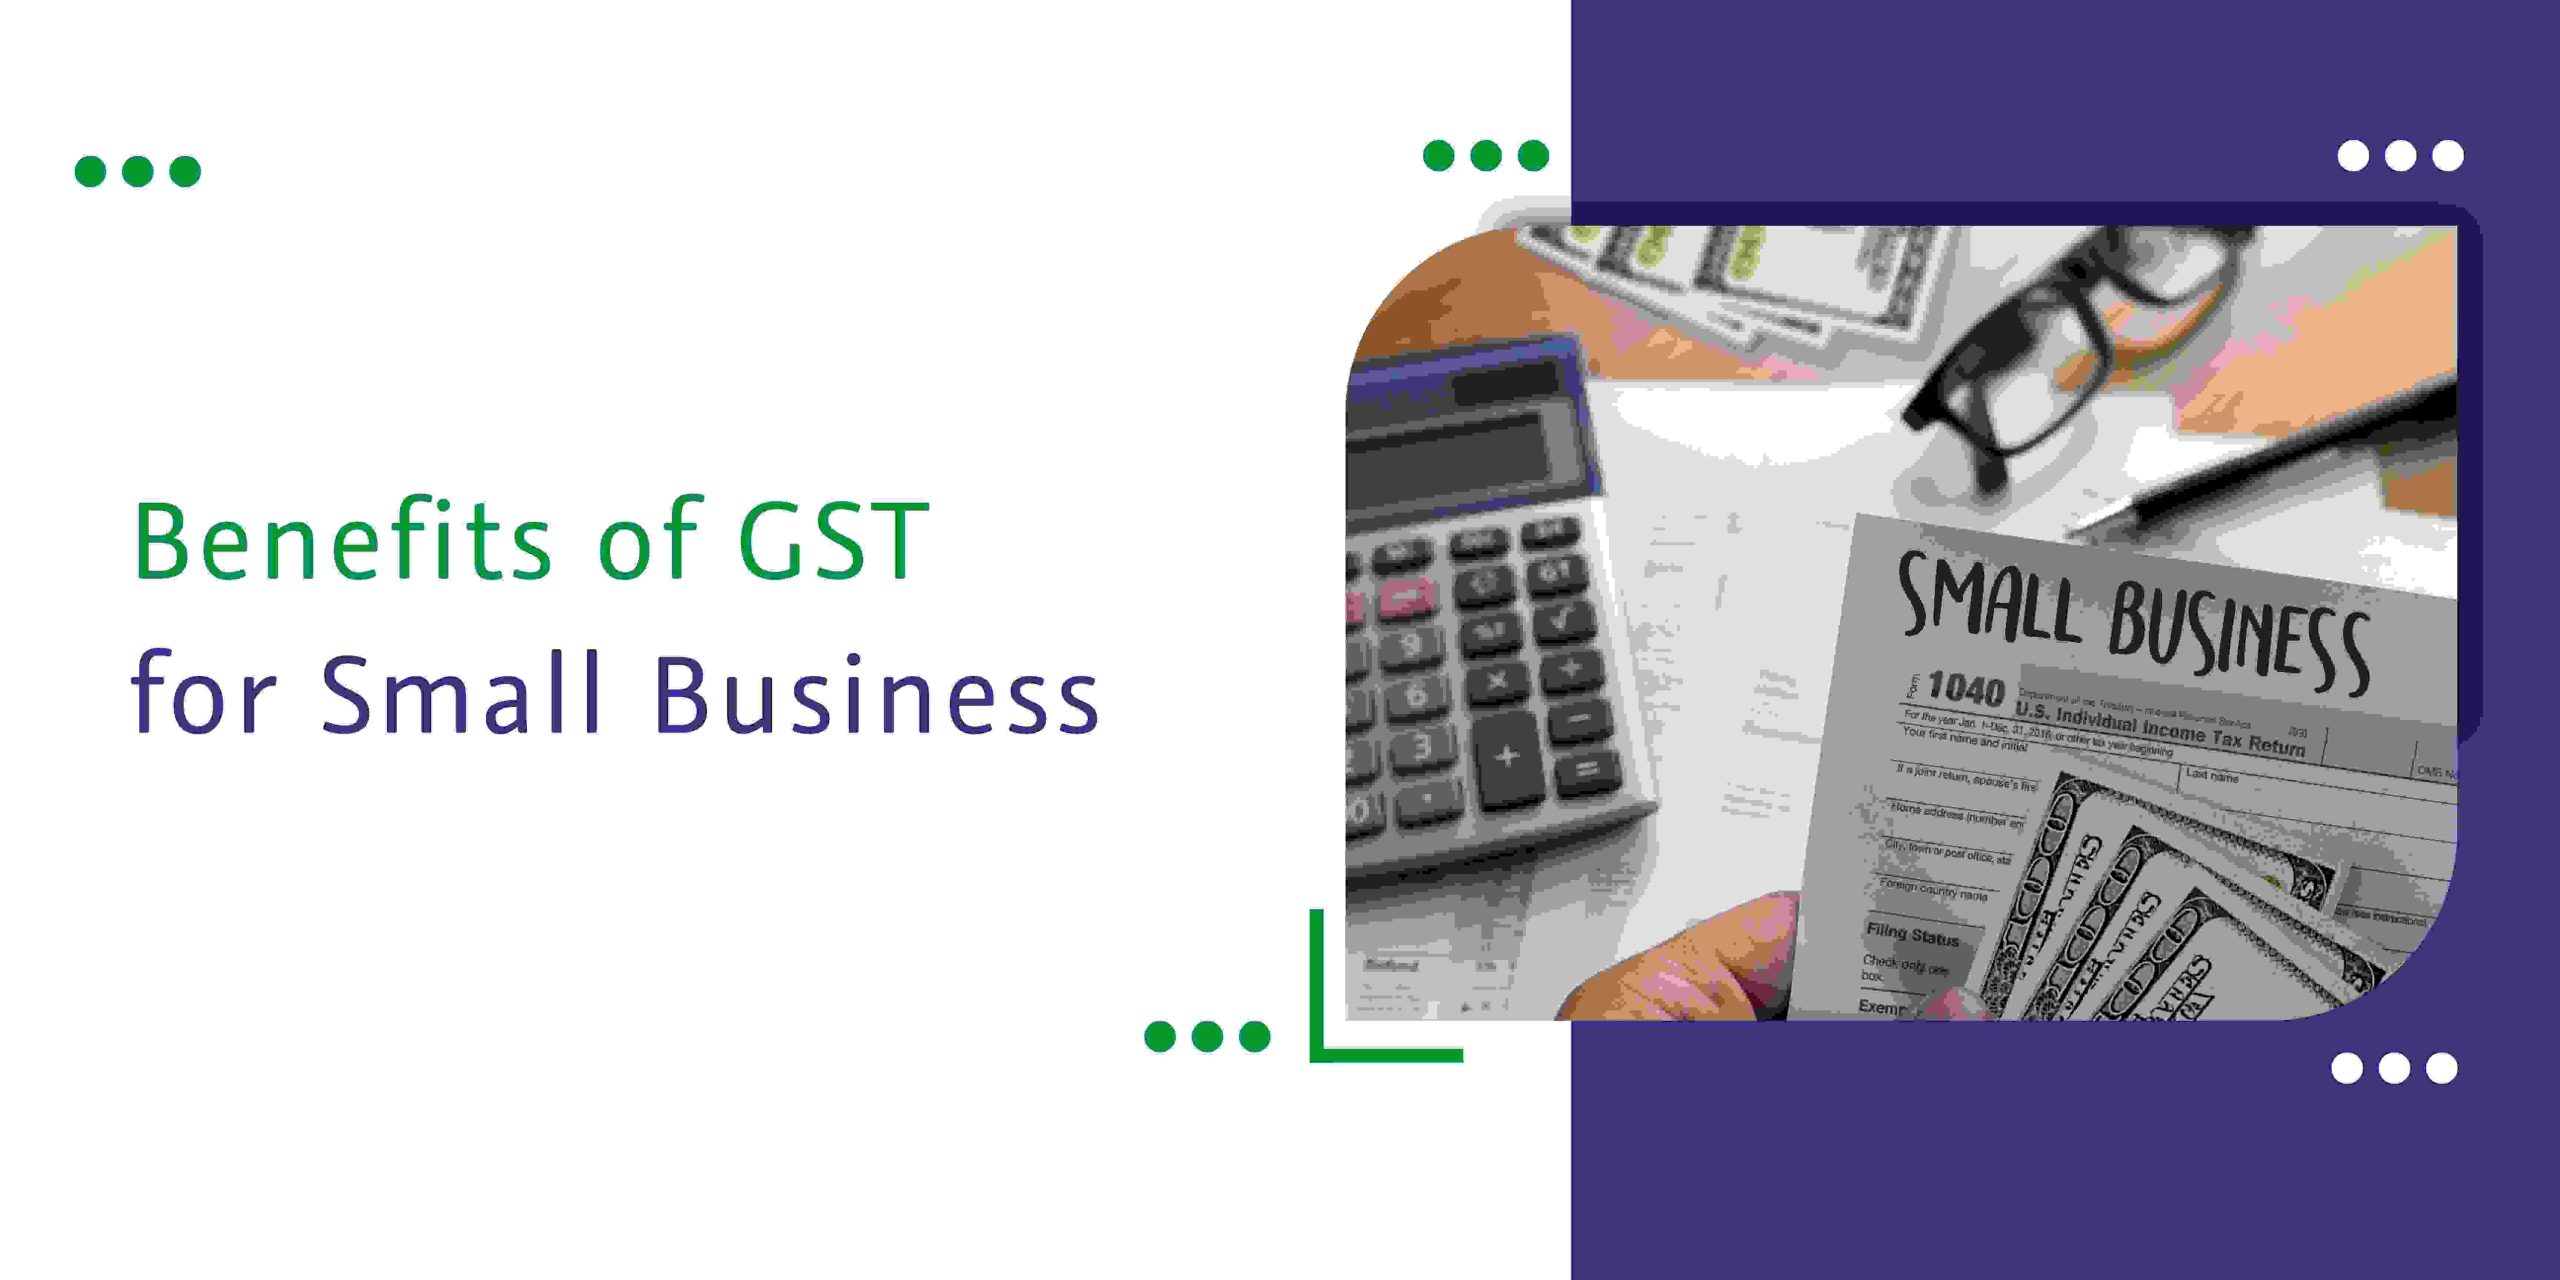 CaptainBiz: Benefits of GST for Small Business